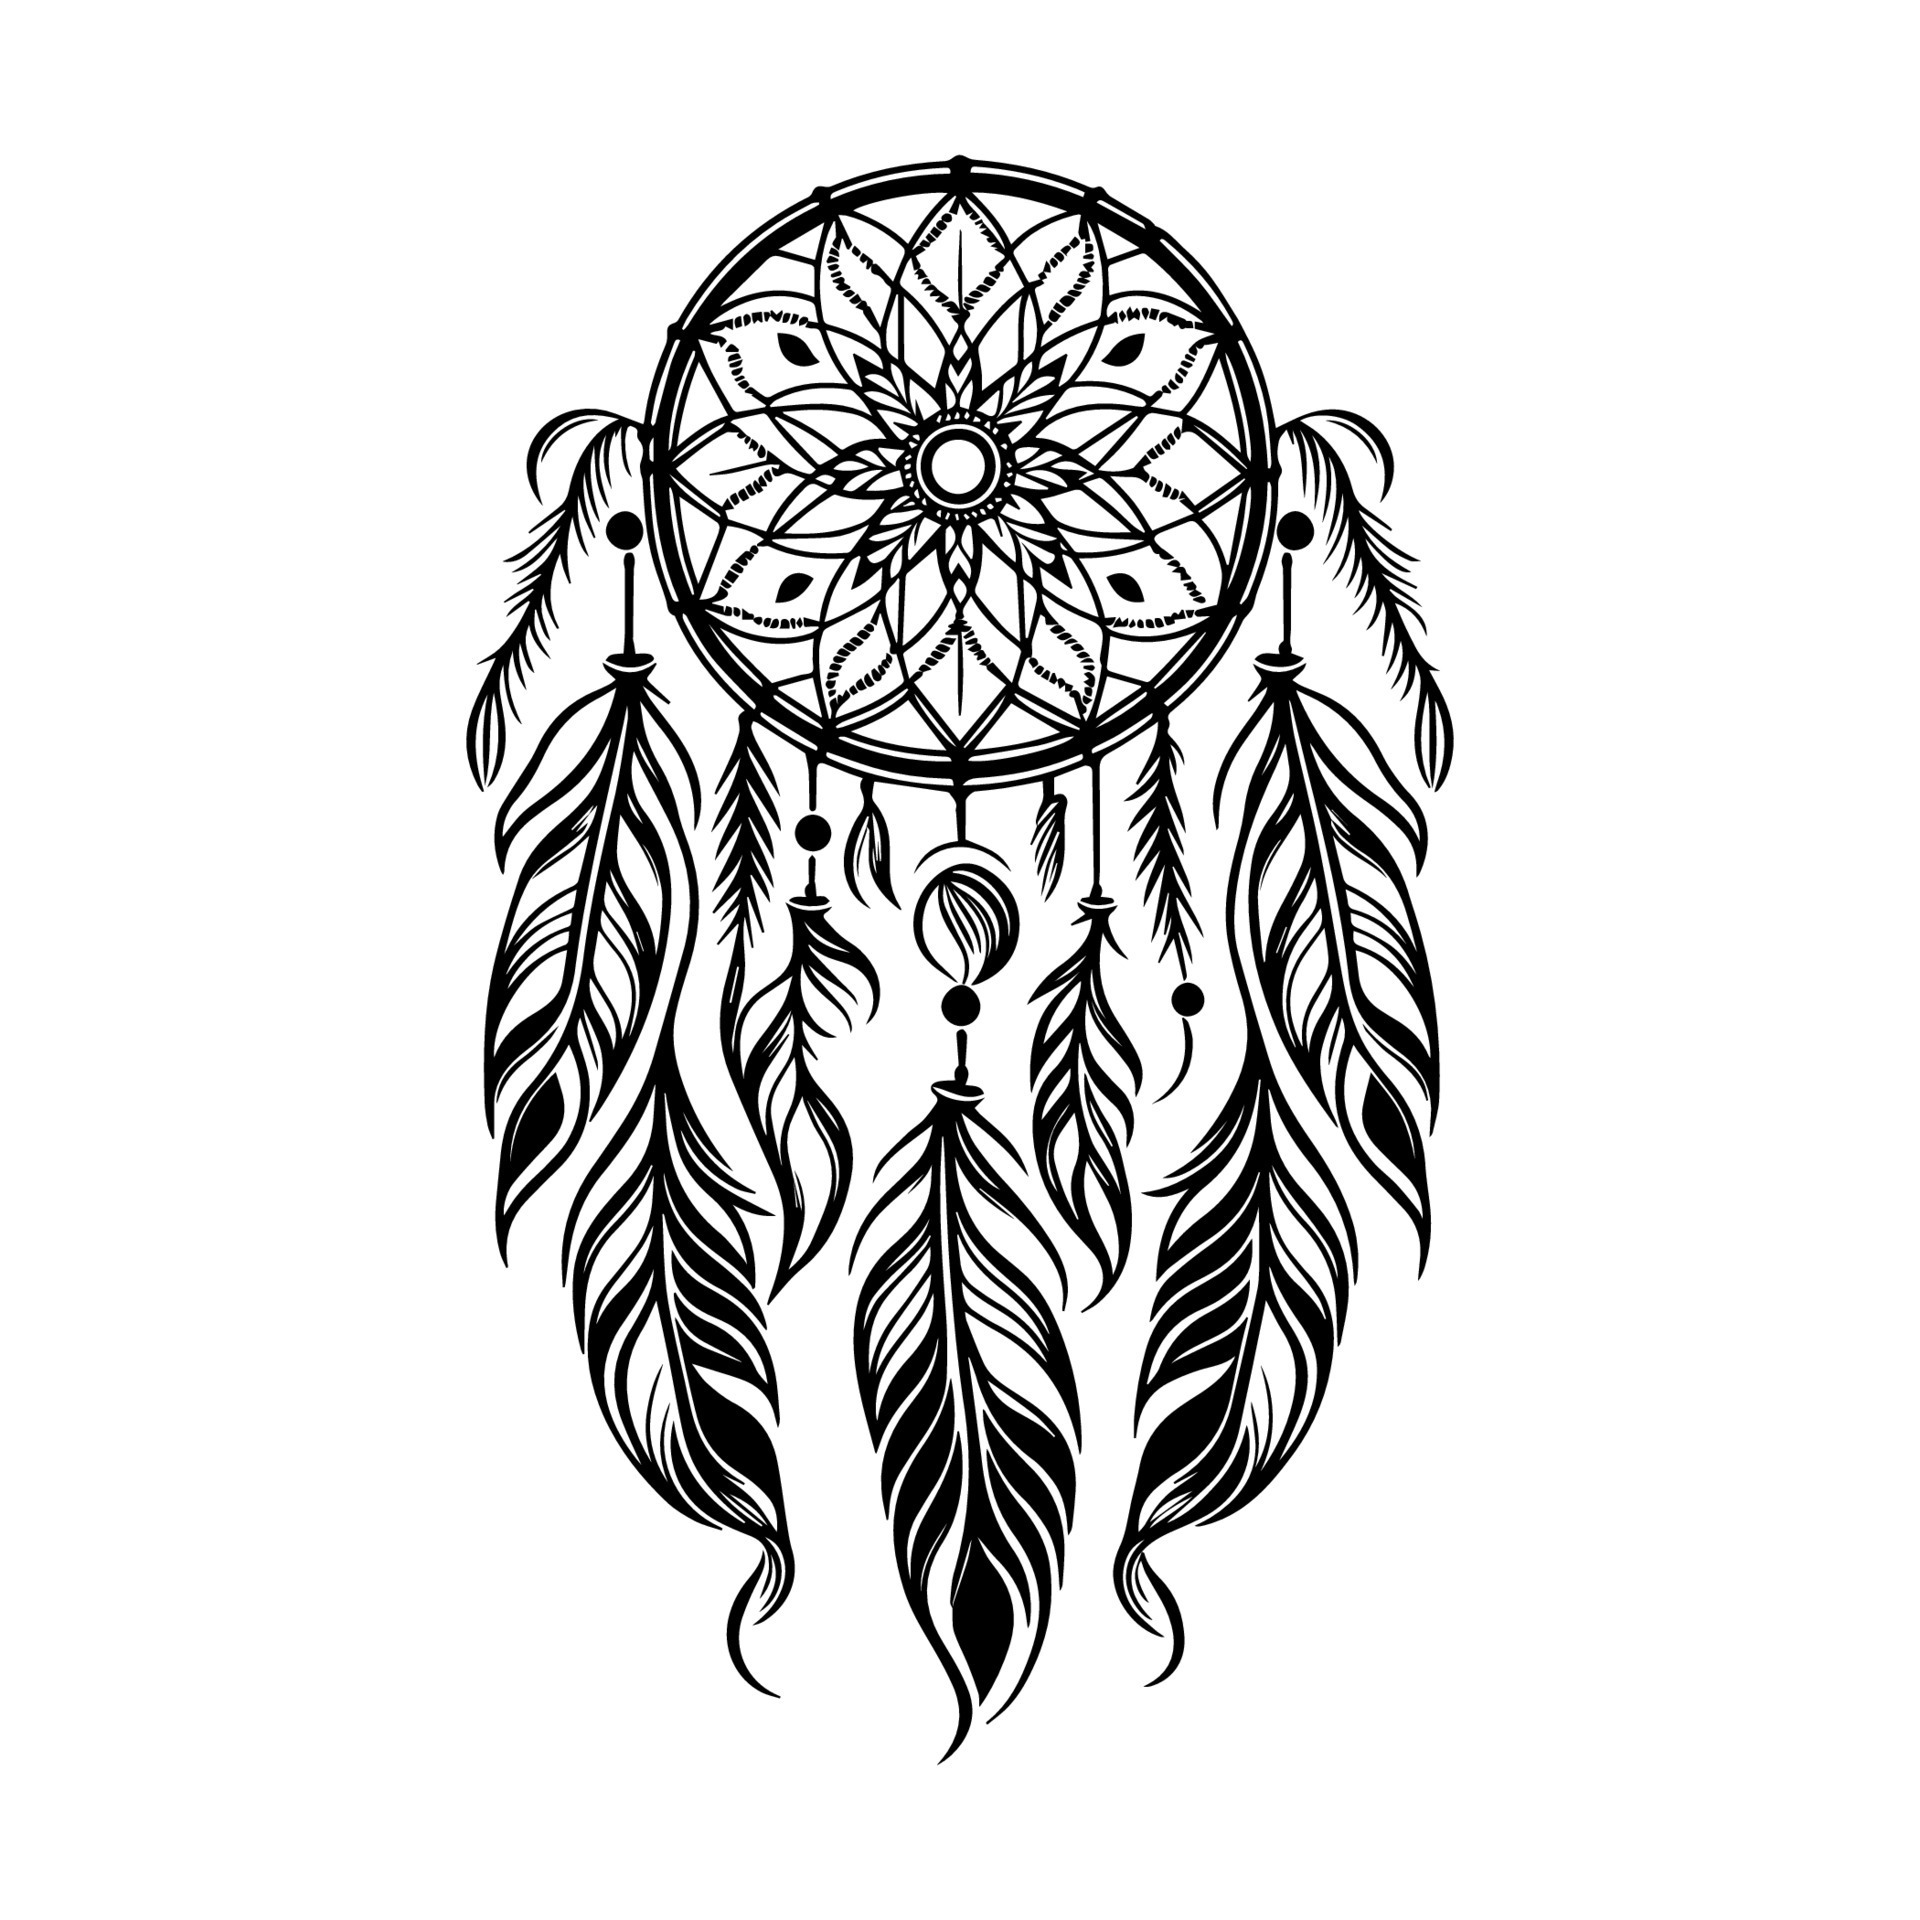 Dream catcher Images - Search Images on Everypixel